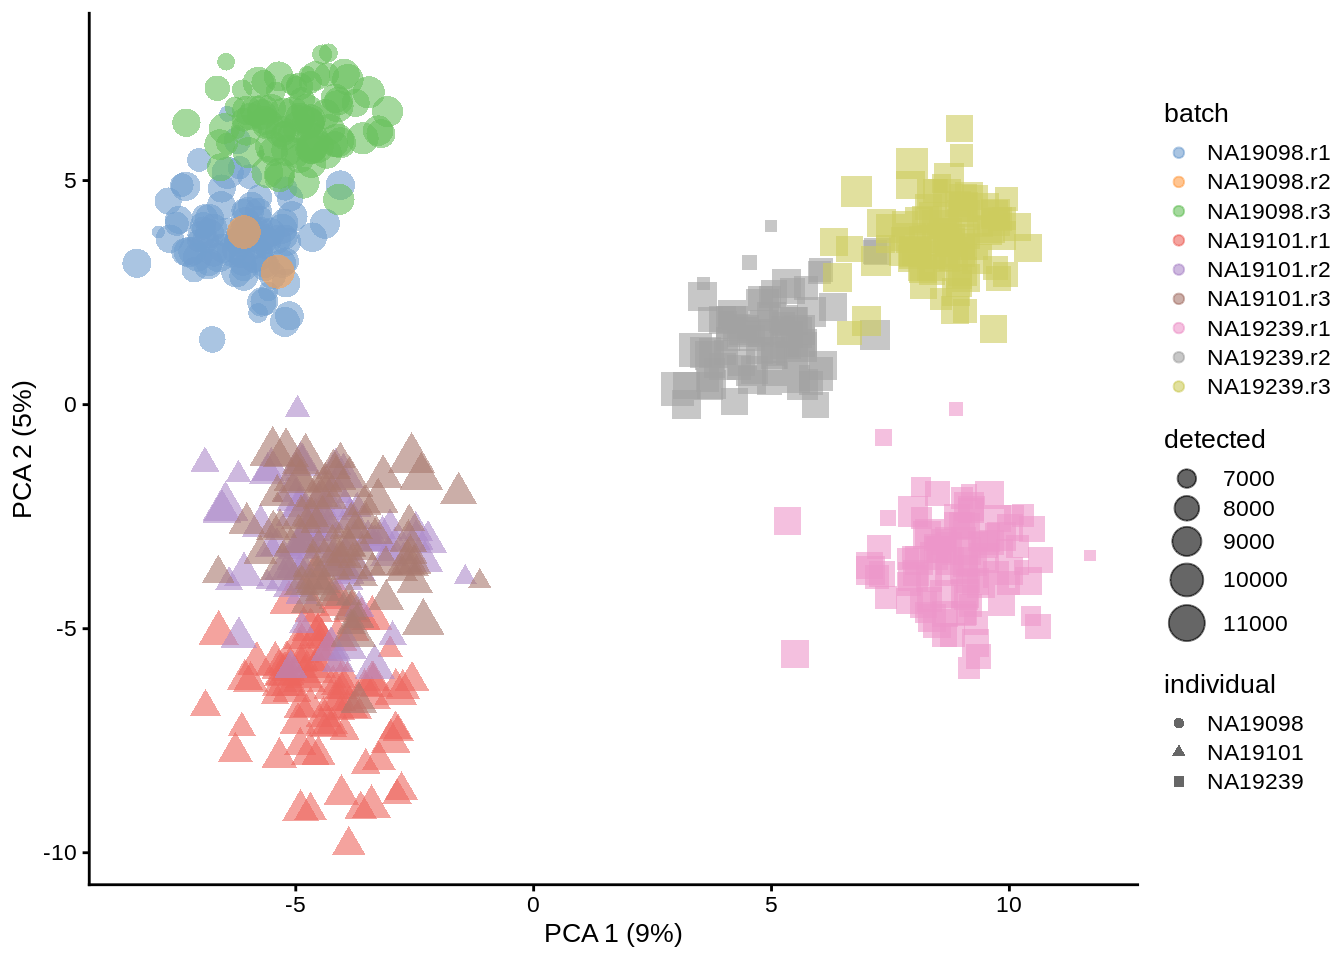 PCA plot of the tung data after deconvolution-based (scran) normalisation